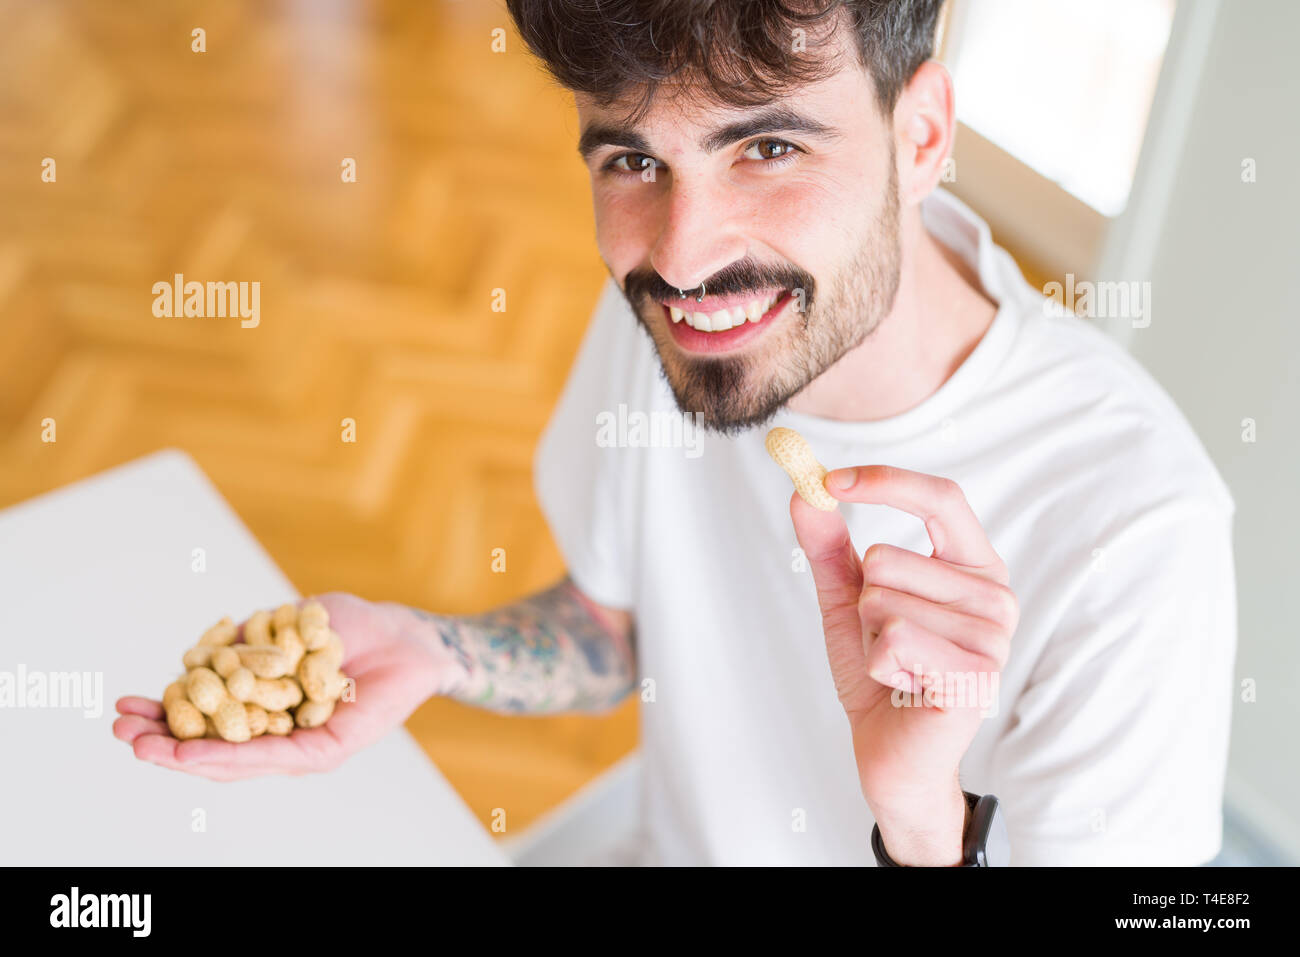 Young man eating peanuts, close up of hand with a bunch of healthy nuts Stock Photo